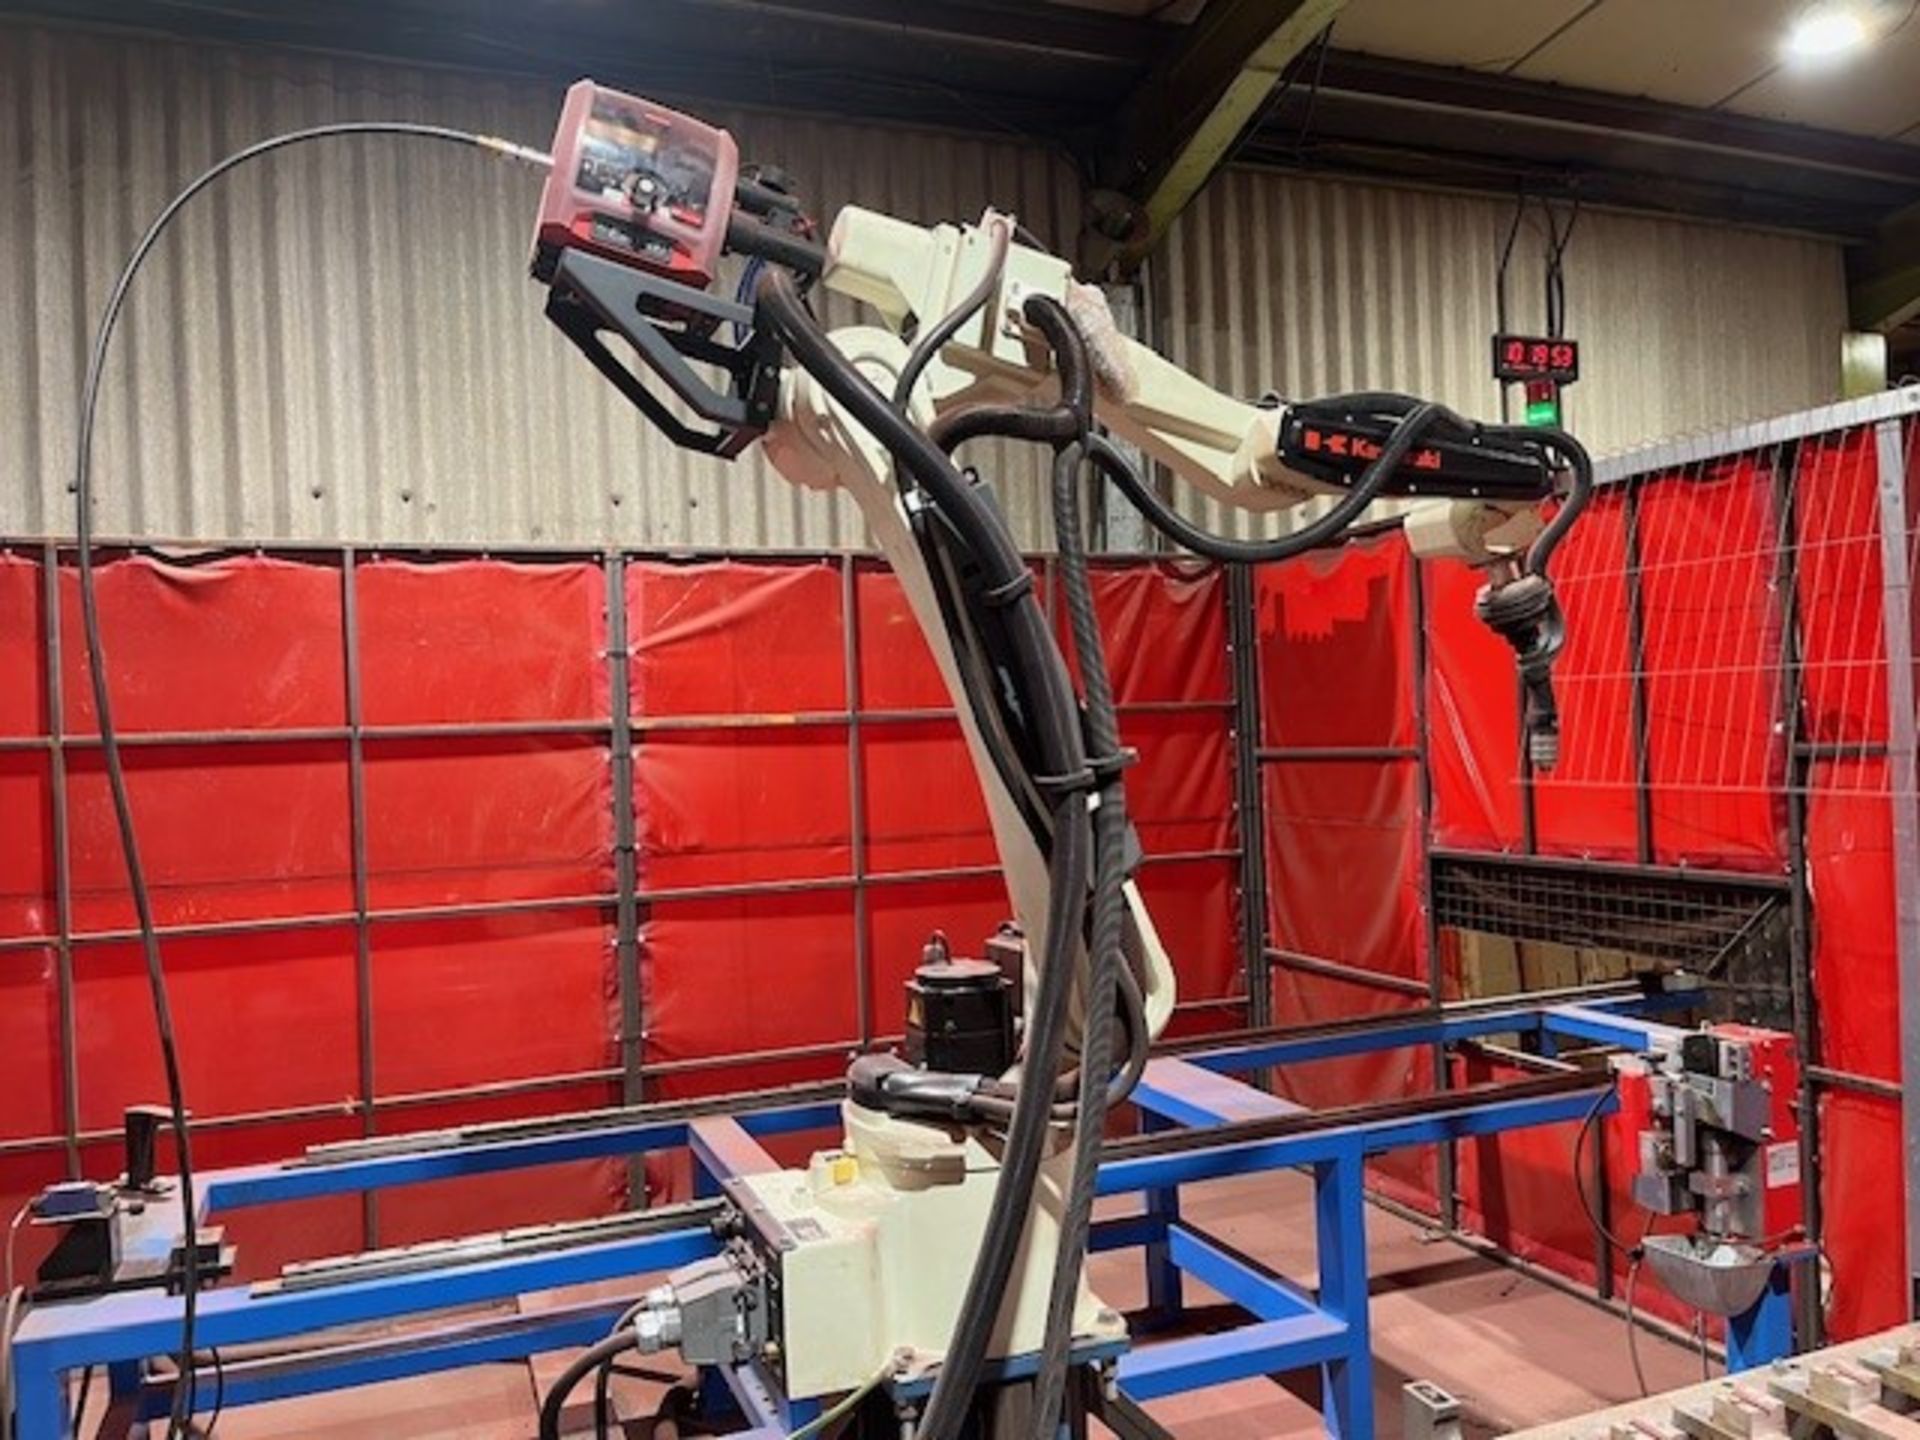 Kawasaki BA006L welding robot (2020) with controller, Fornius TPS400i welder, extractor and more